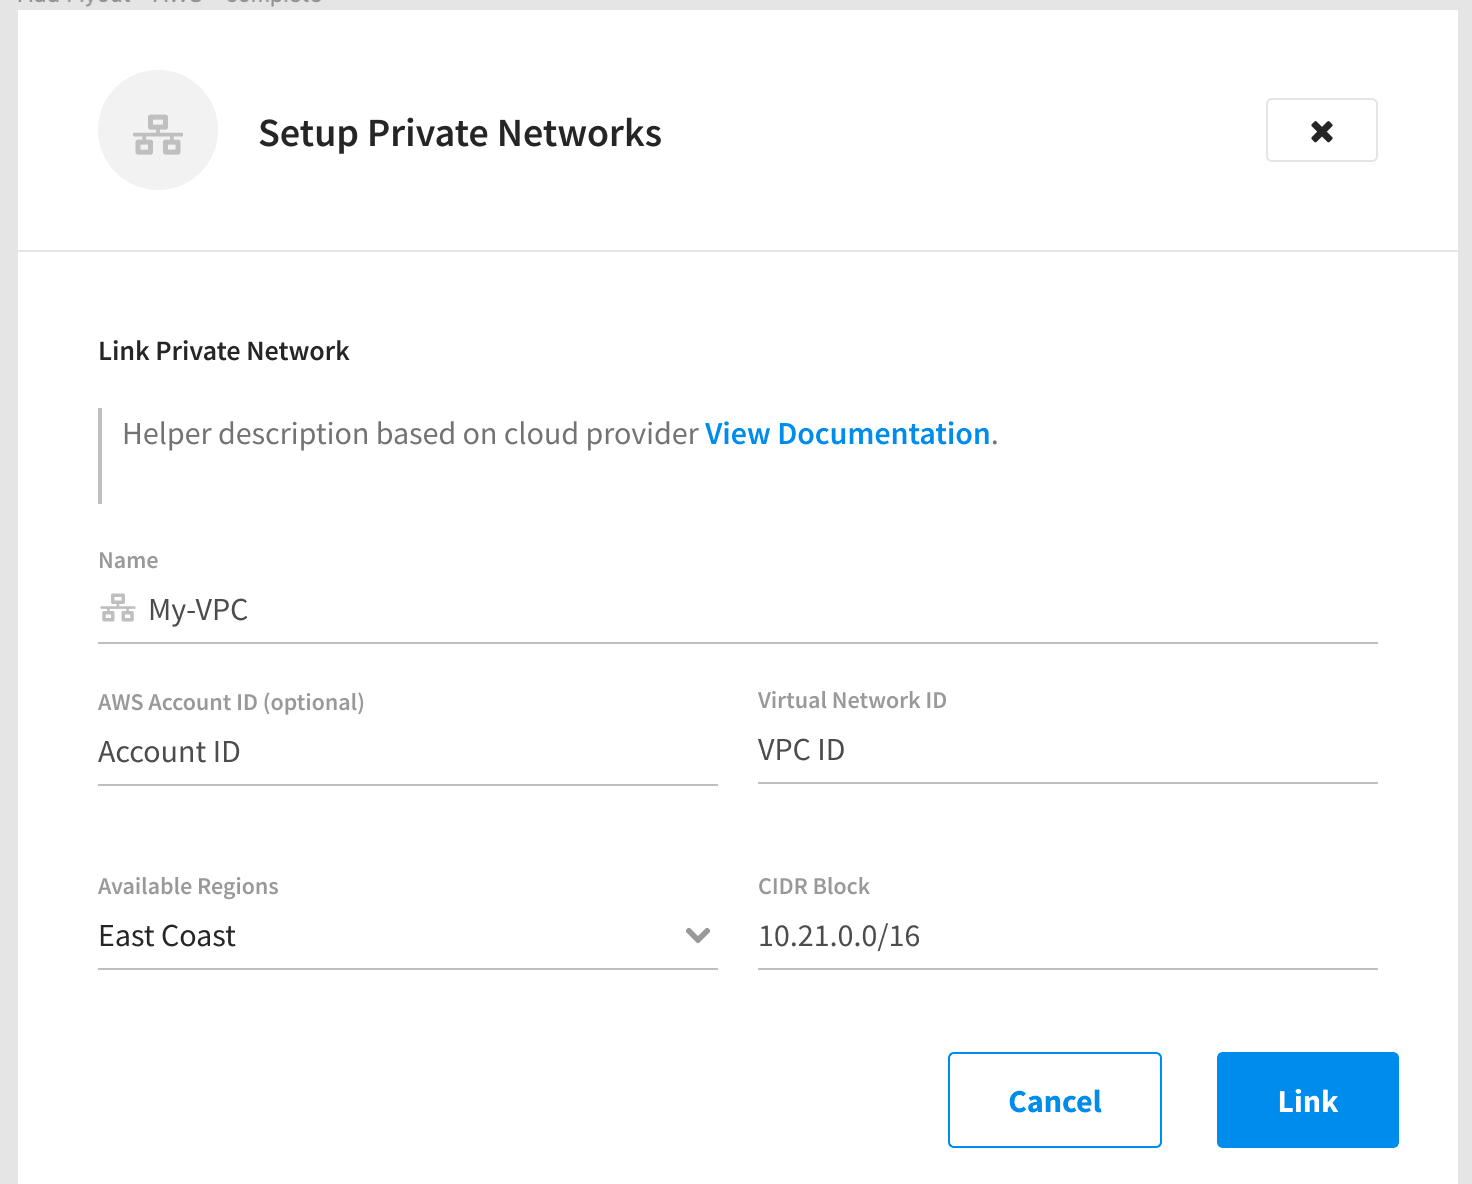 Provide details to create a private network.